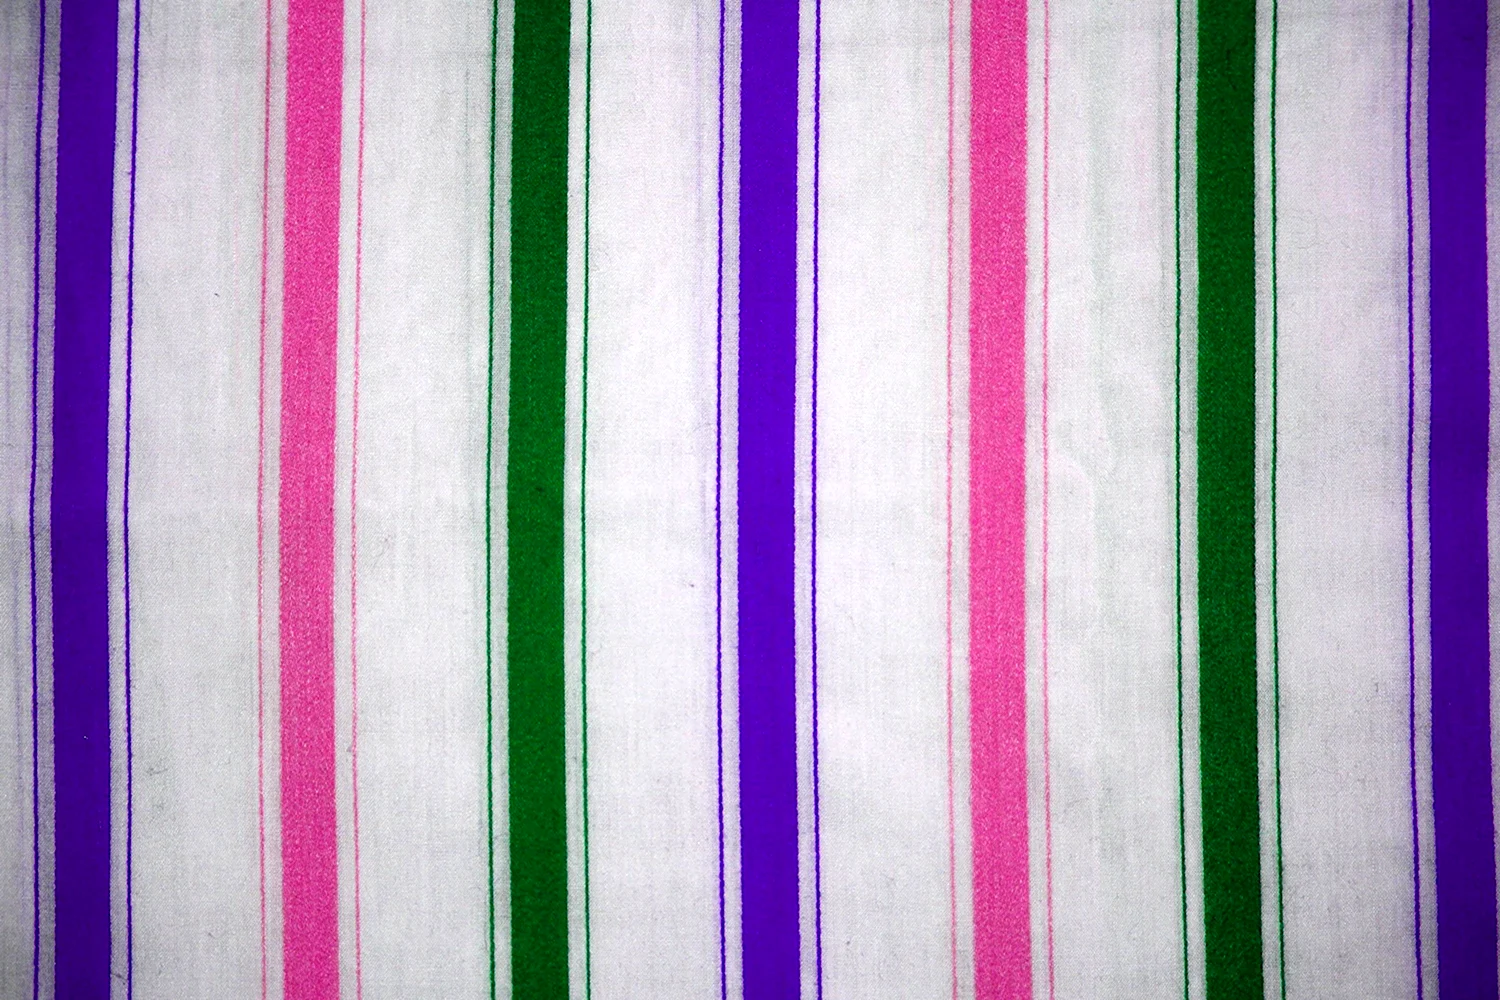 Lilac Striped Fabric texture